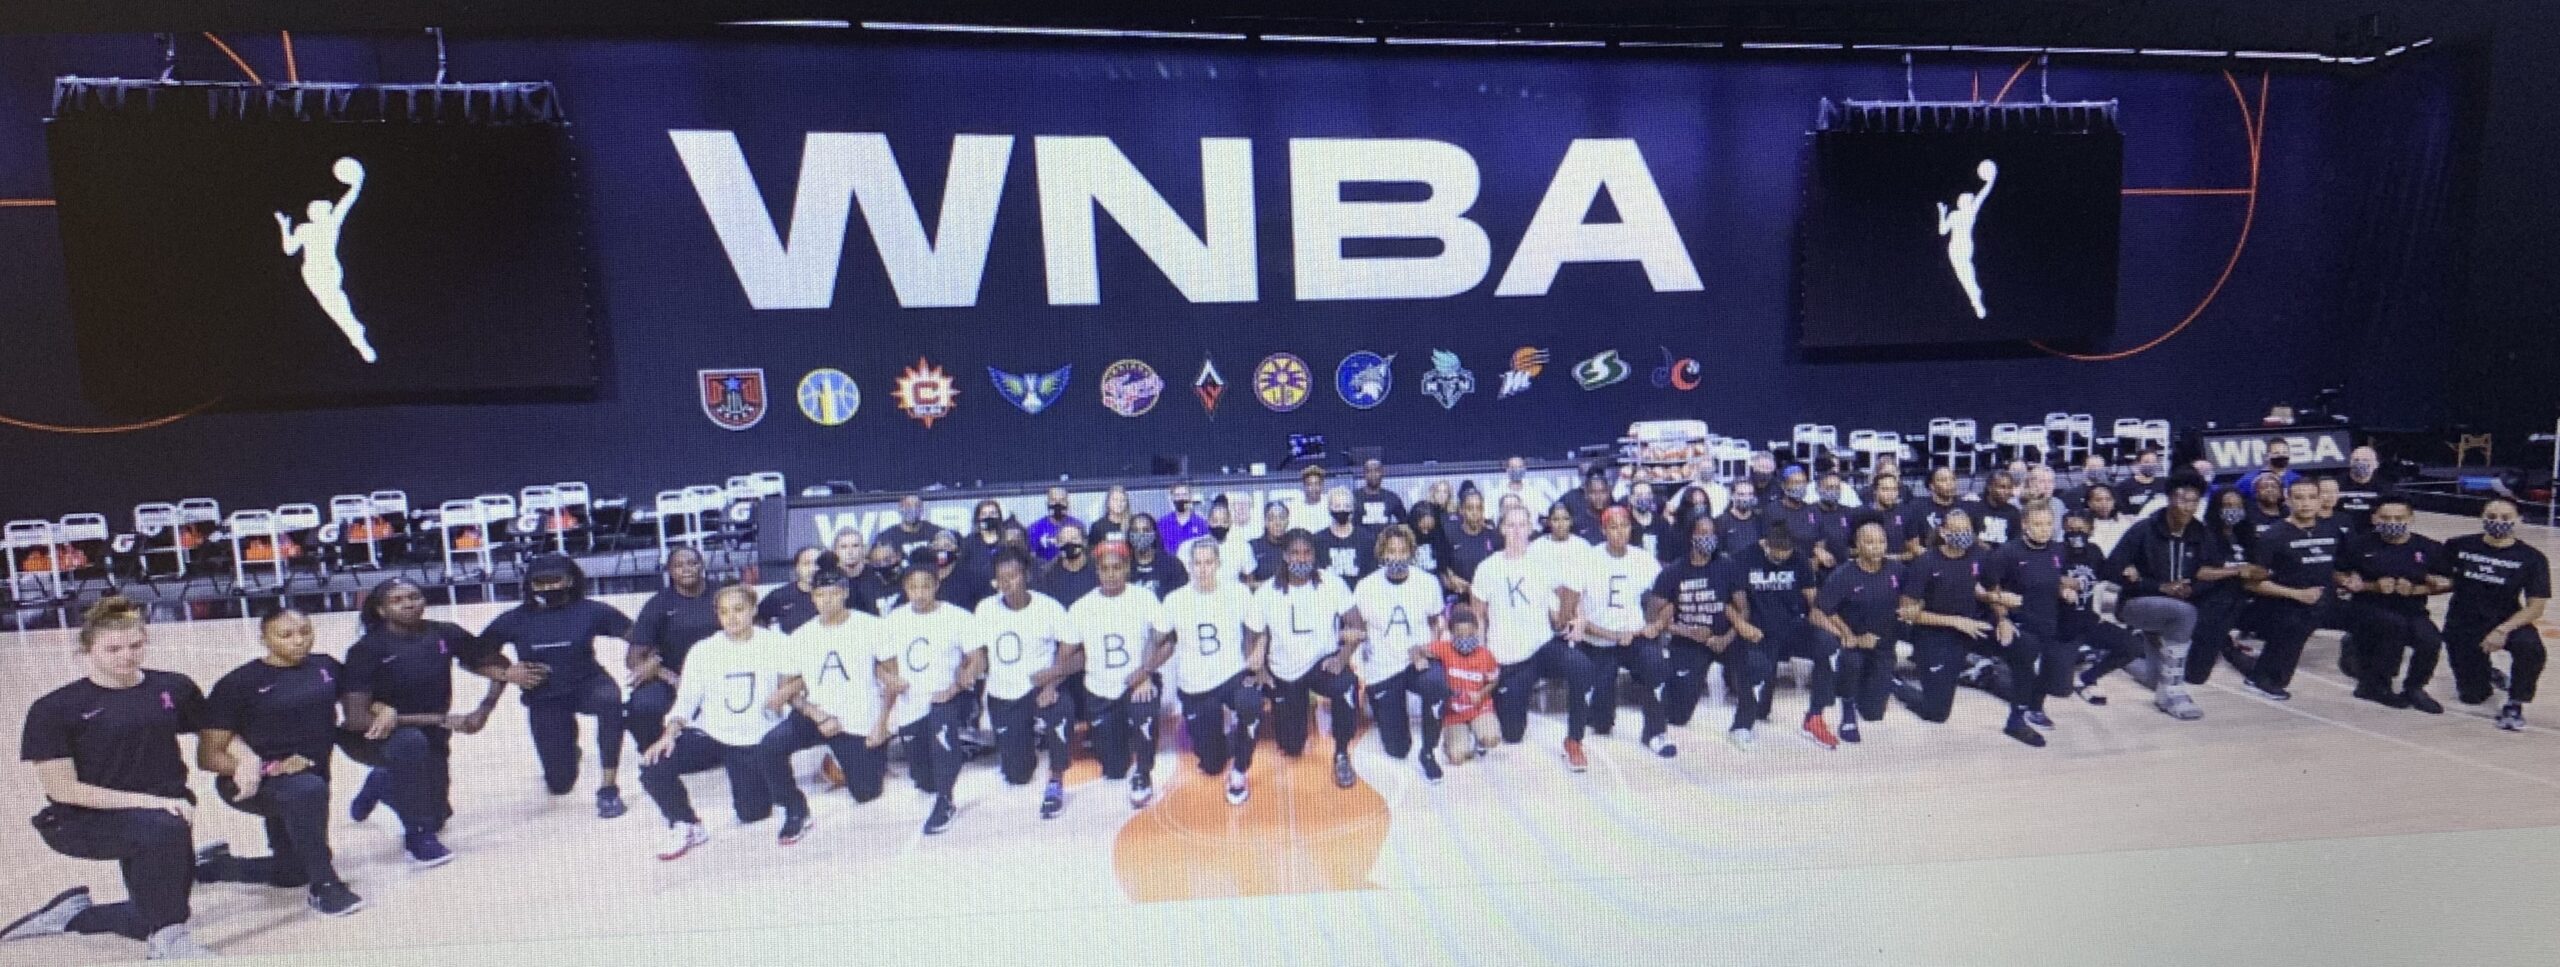 WNBA Honors Players for Dedication to Social Justice